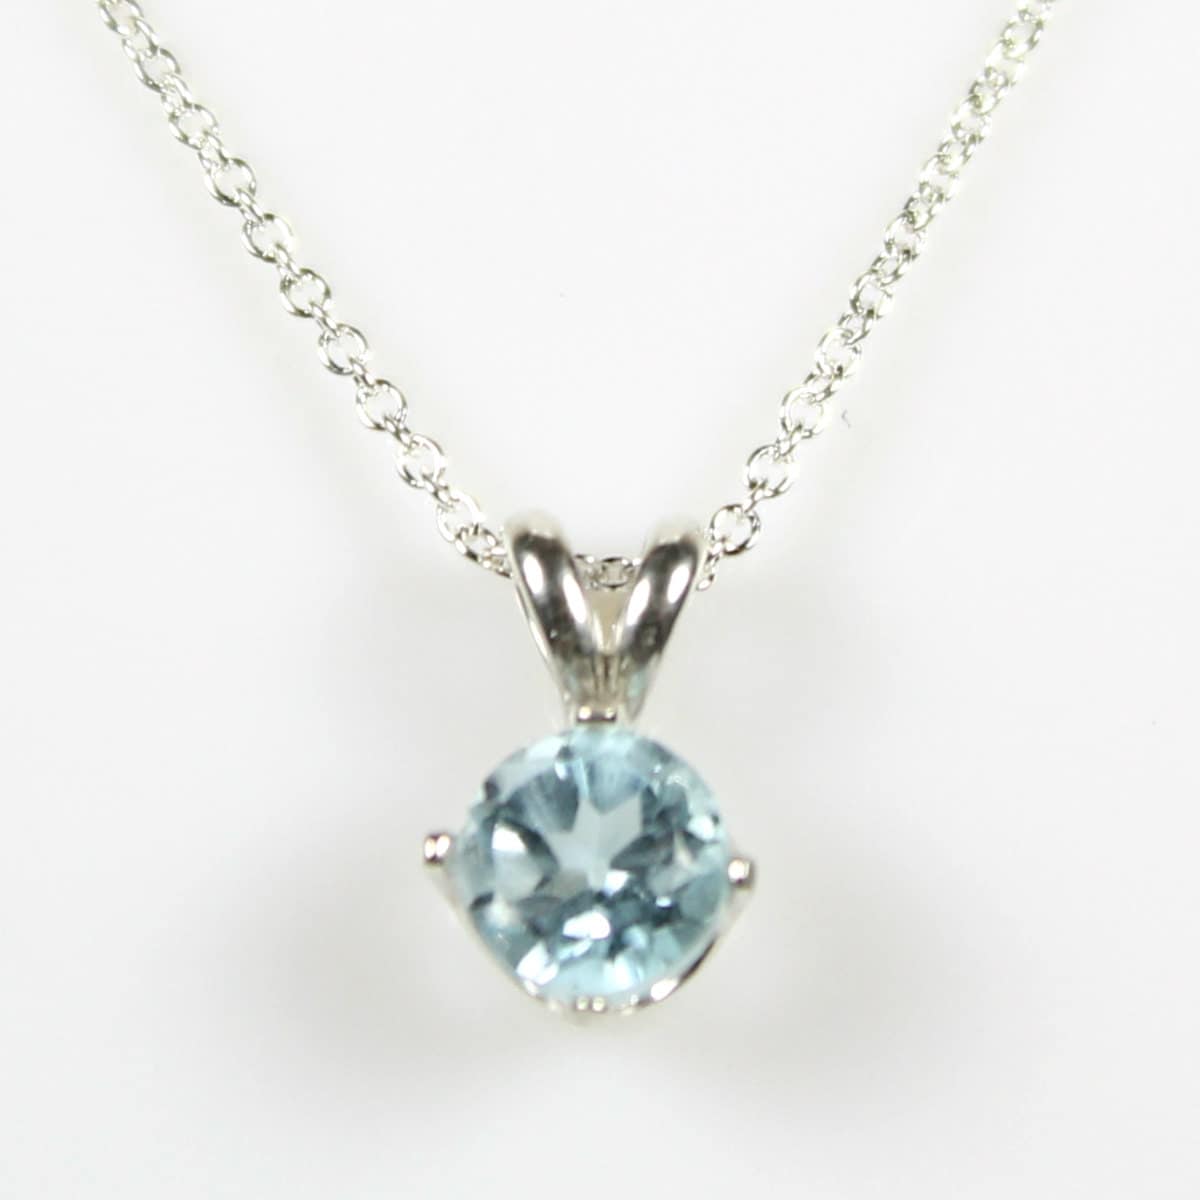 Silver Blue Topaz Necklace 18 Inch or 16 Inch Chain by swanky925